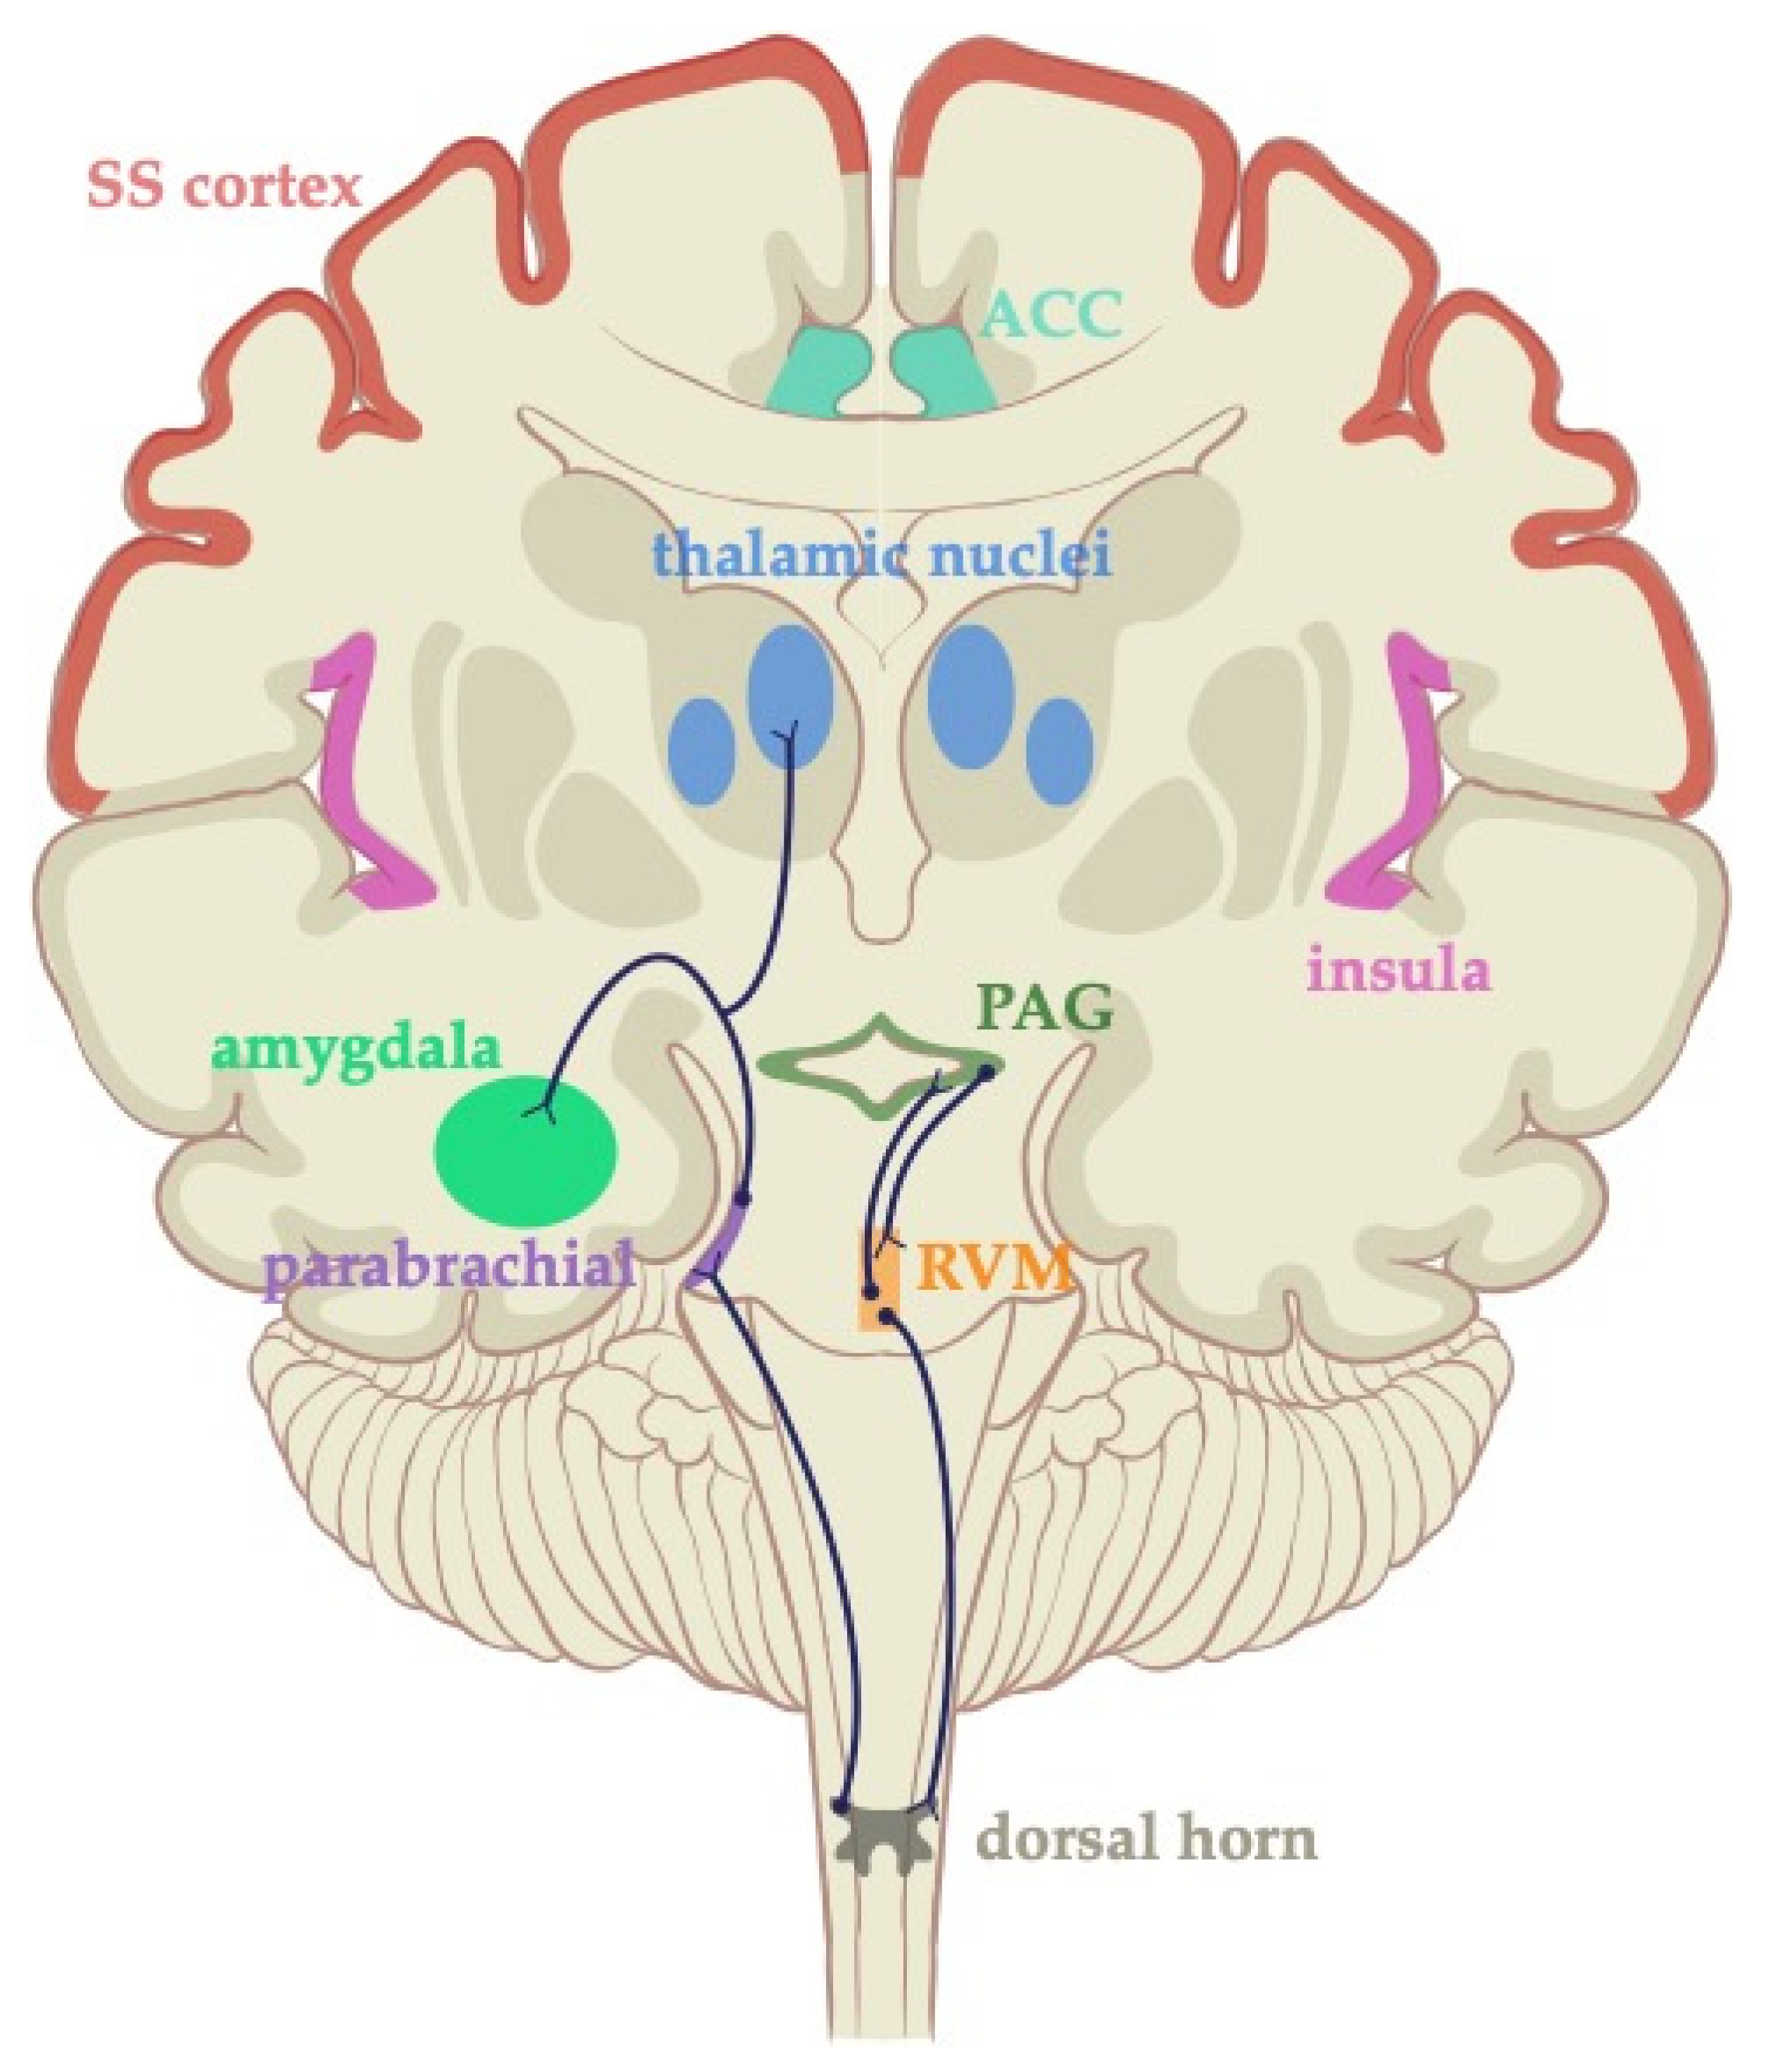 Jcm Free Full Text The Cerebral Localization Of Pain Anatomical And Functional Considerations For Targeted Electrical Therapies Html